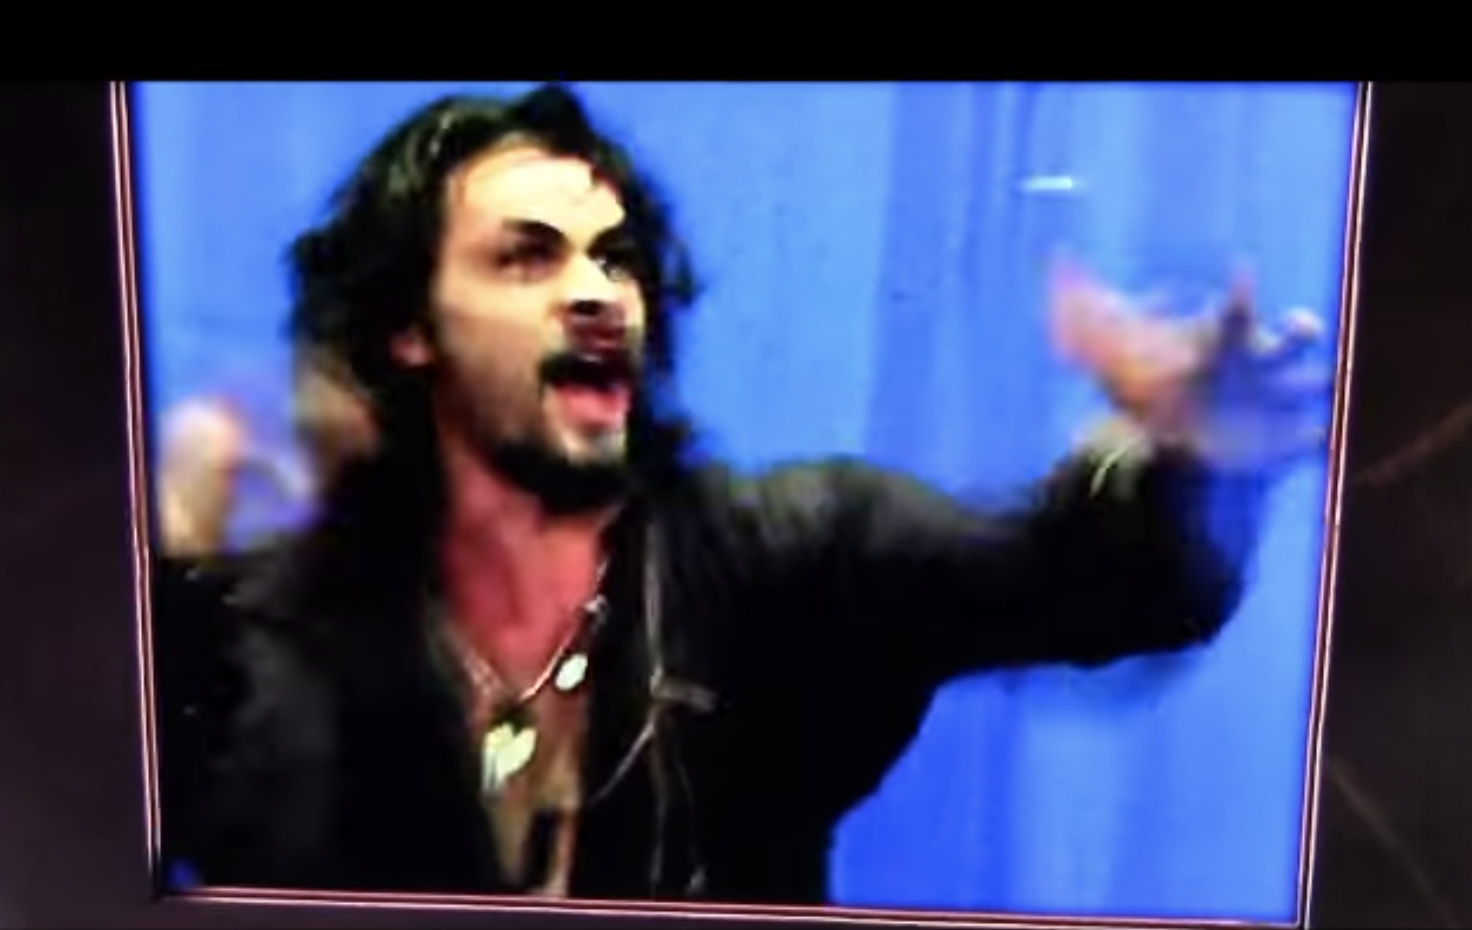 WATCH: Game of Thrones star "Khal Drogo" resorts to Haka to appear terrifying in audition tape